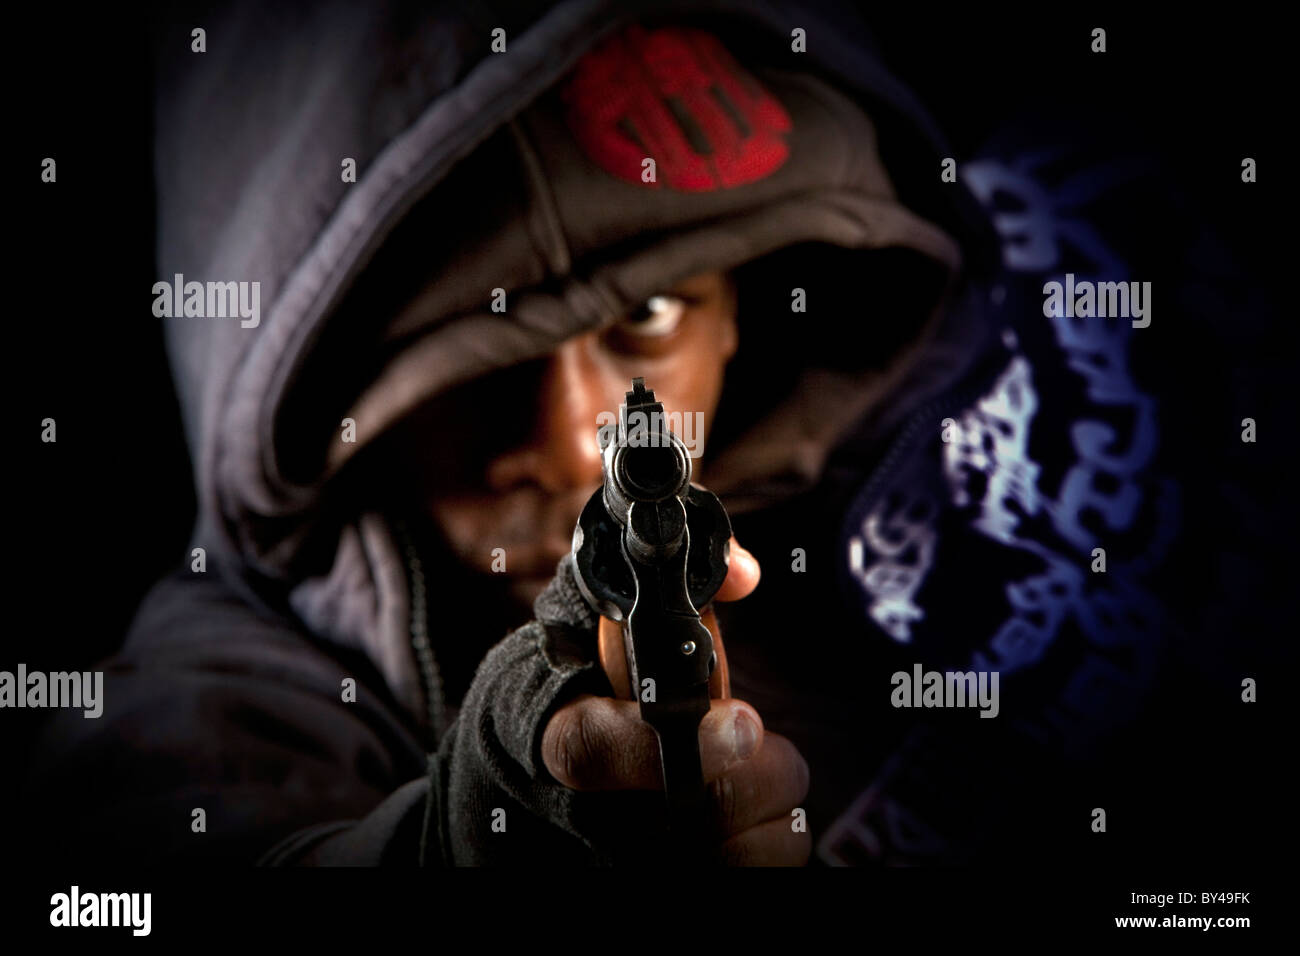 Young black male model posing with a gun Stock Photo